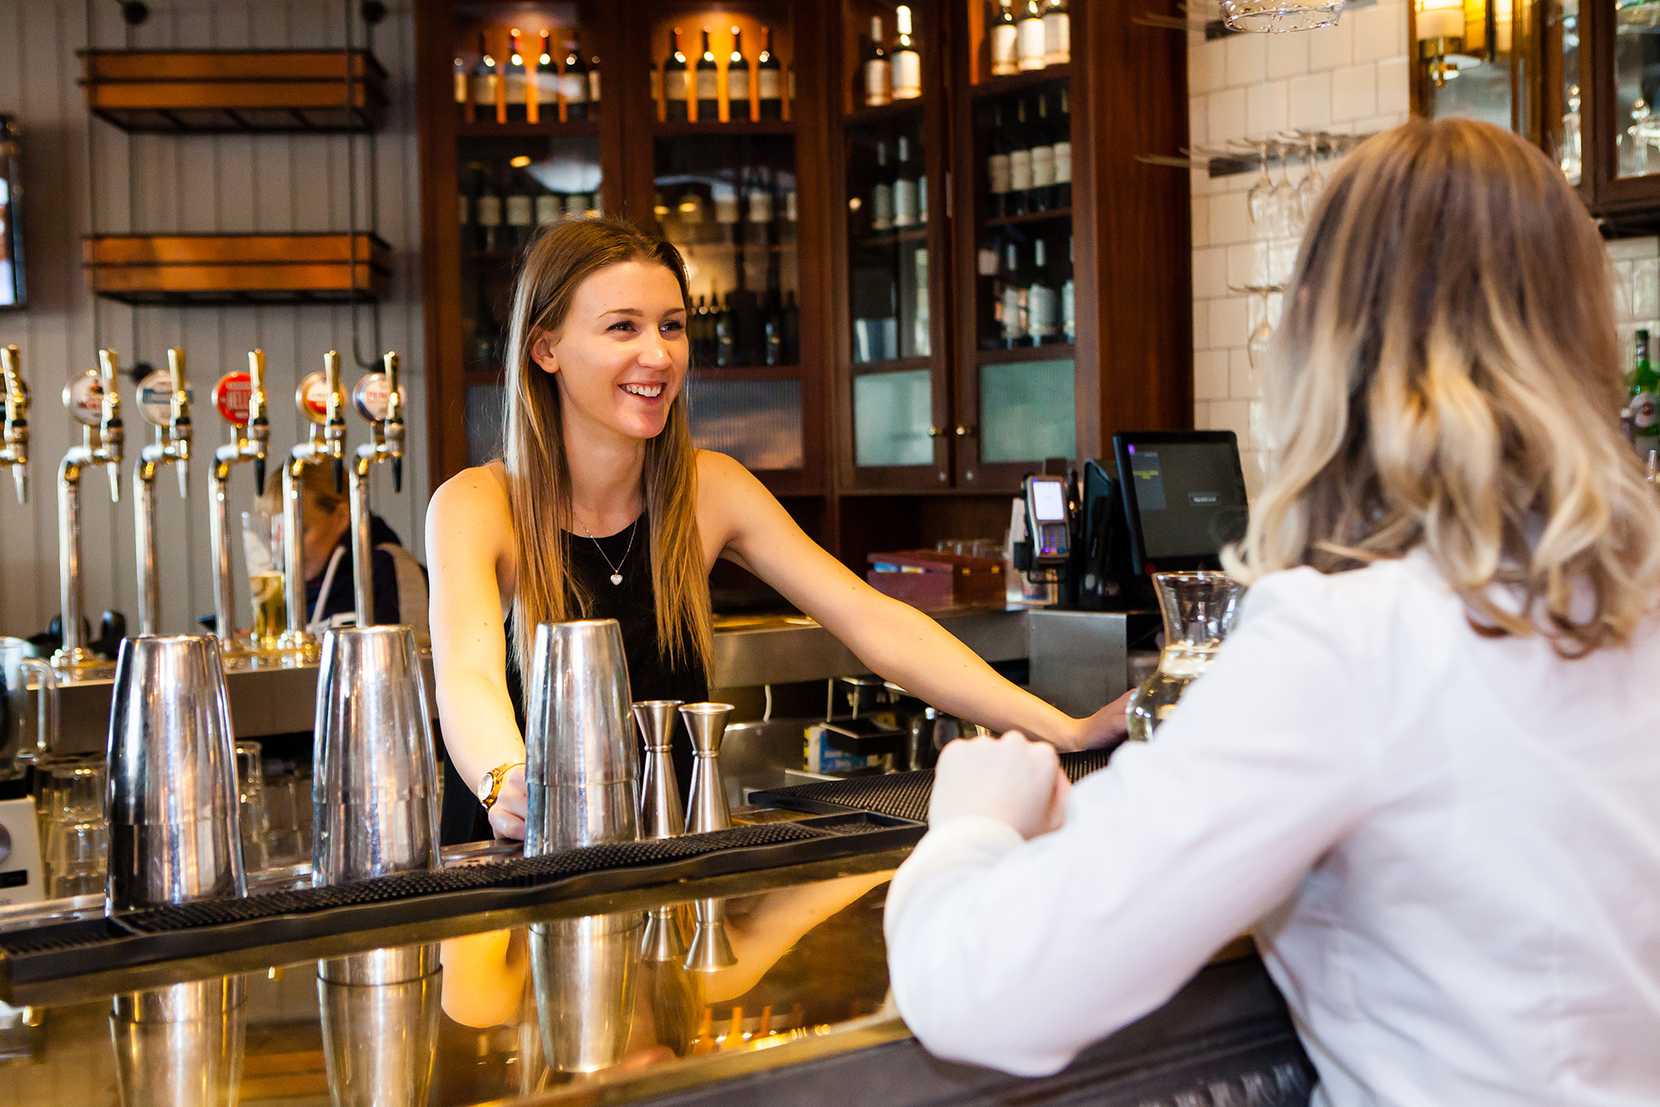 A guest smiles across the bar at the team member who's serving them.